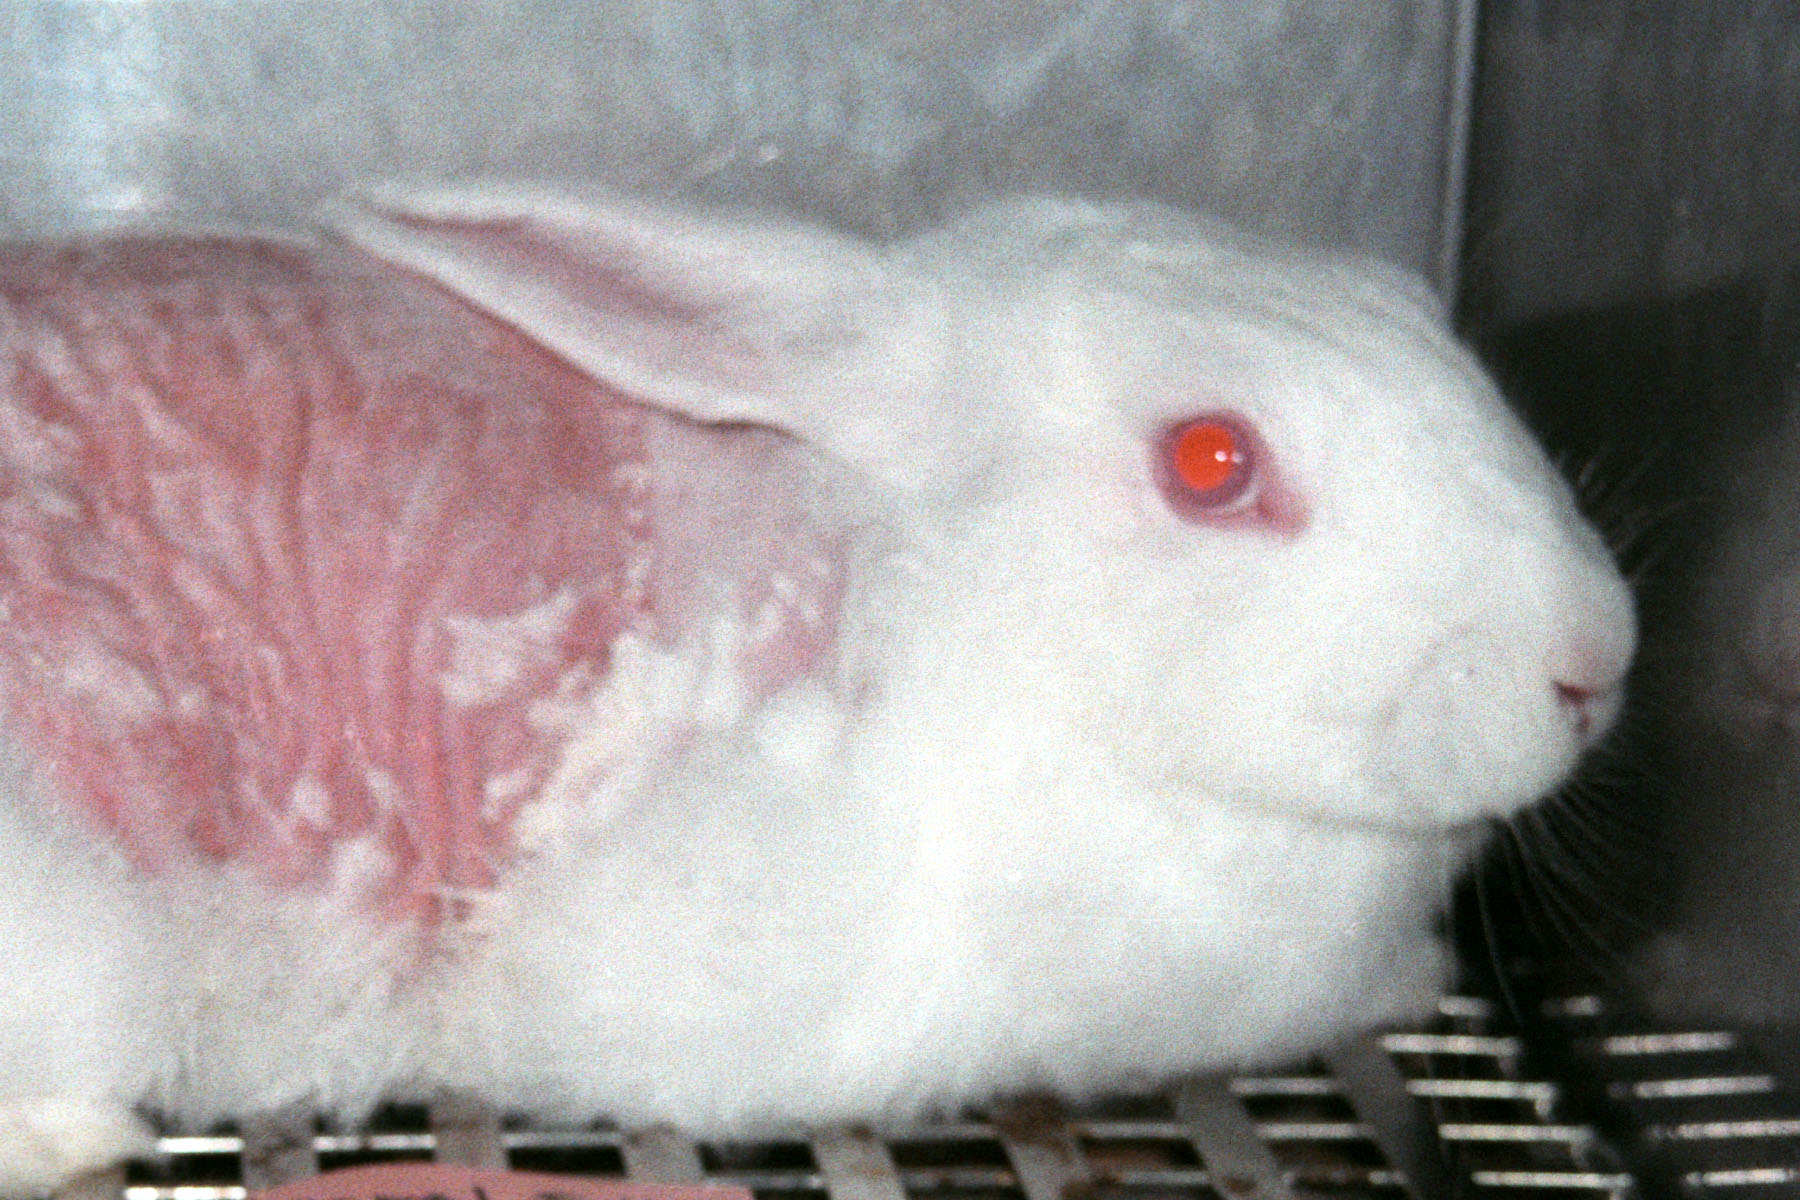 A photo of a skin irritation test done on a rabbit.